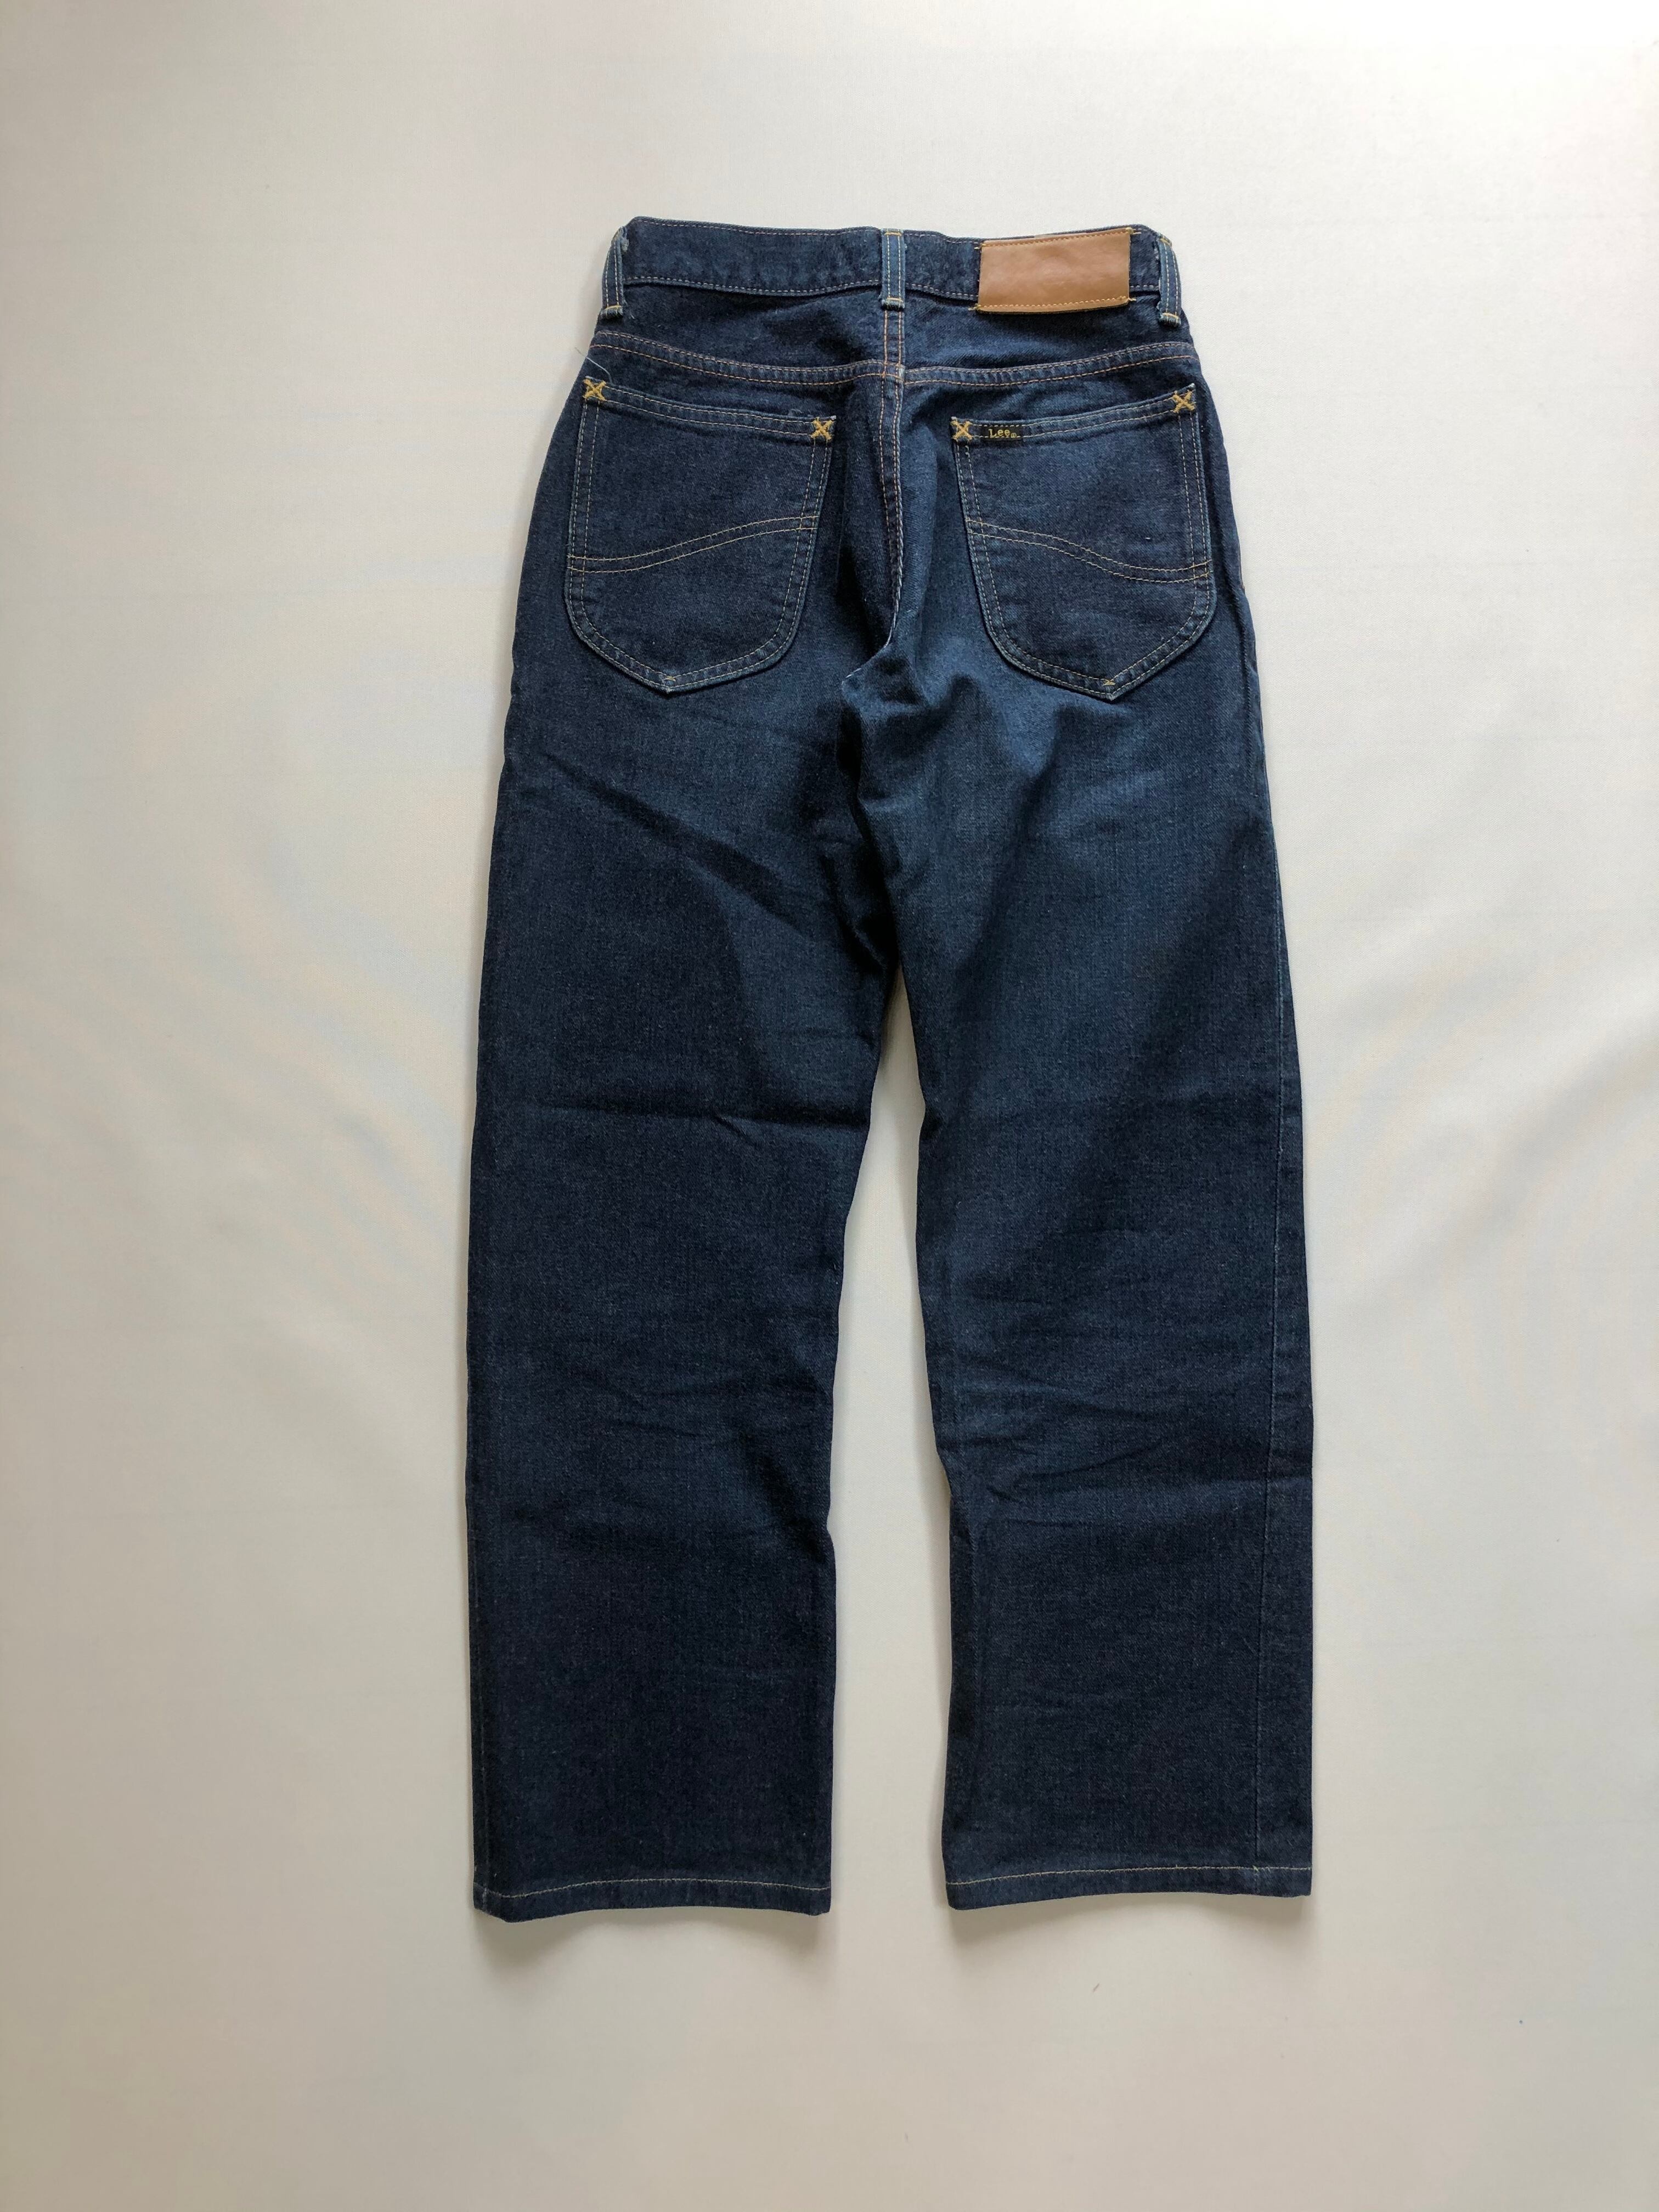 W27 miss Lee made in JAPAN リー 101-B 復刻 211 | ＳＥＣＯＮＤ HAND RED